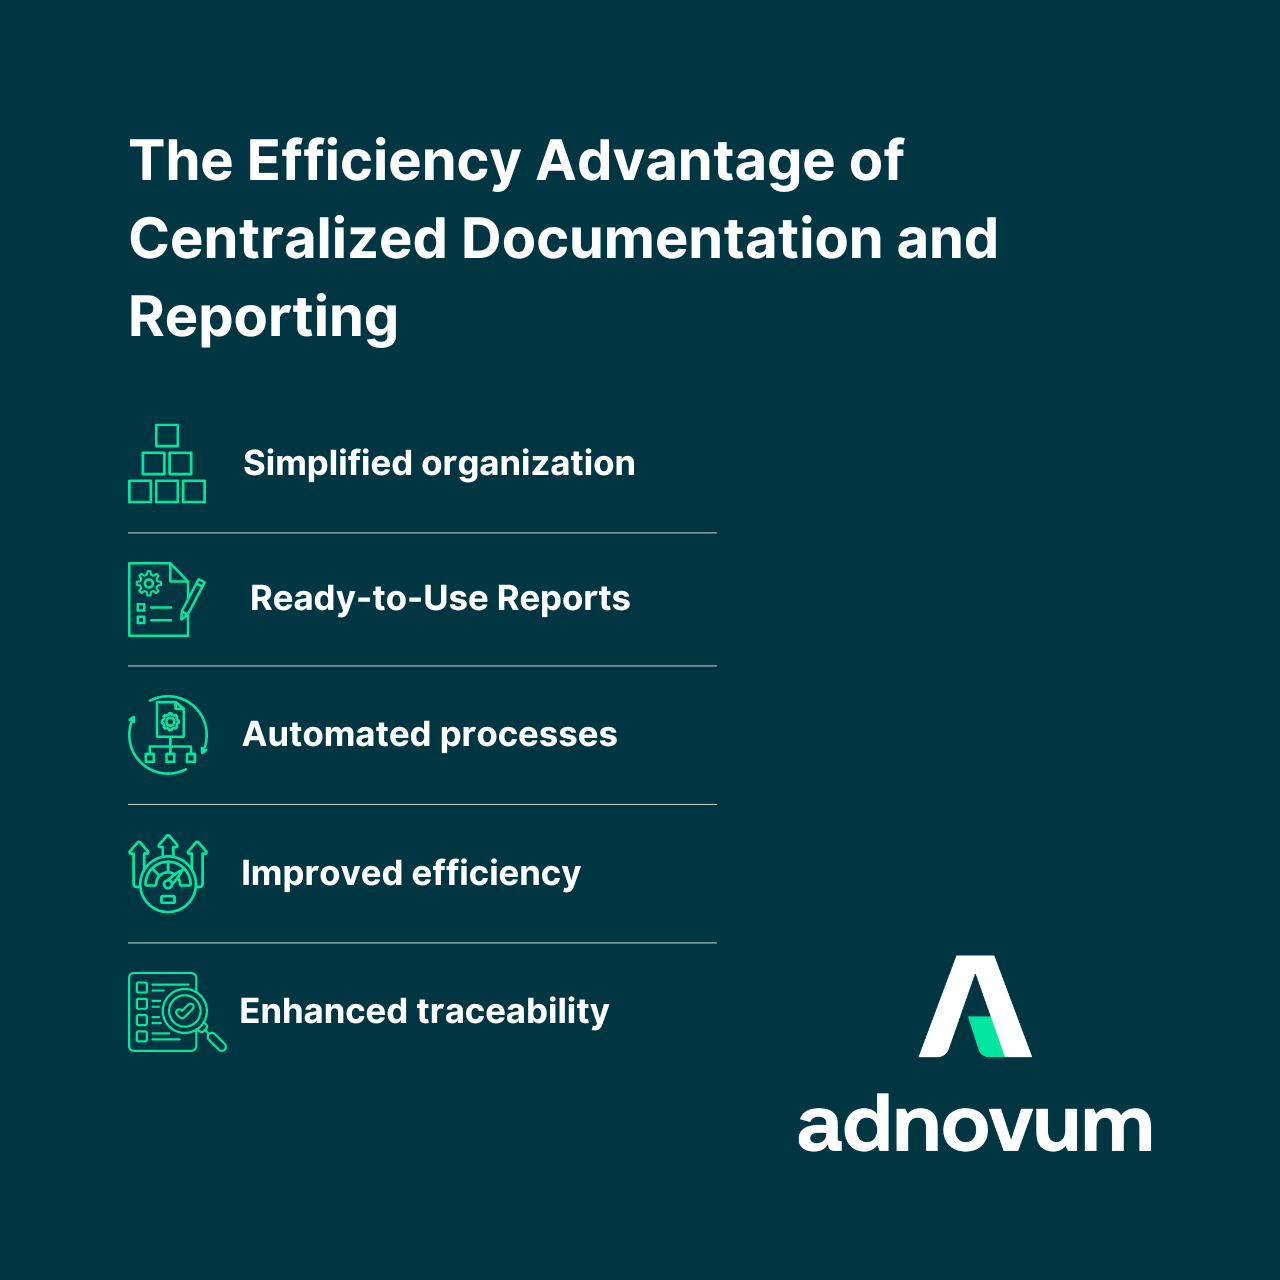 The Efficiency Advantage of Centralized System